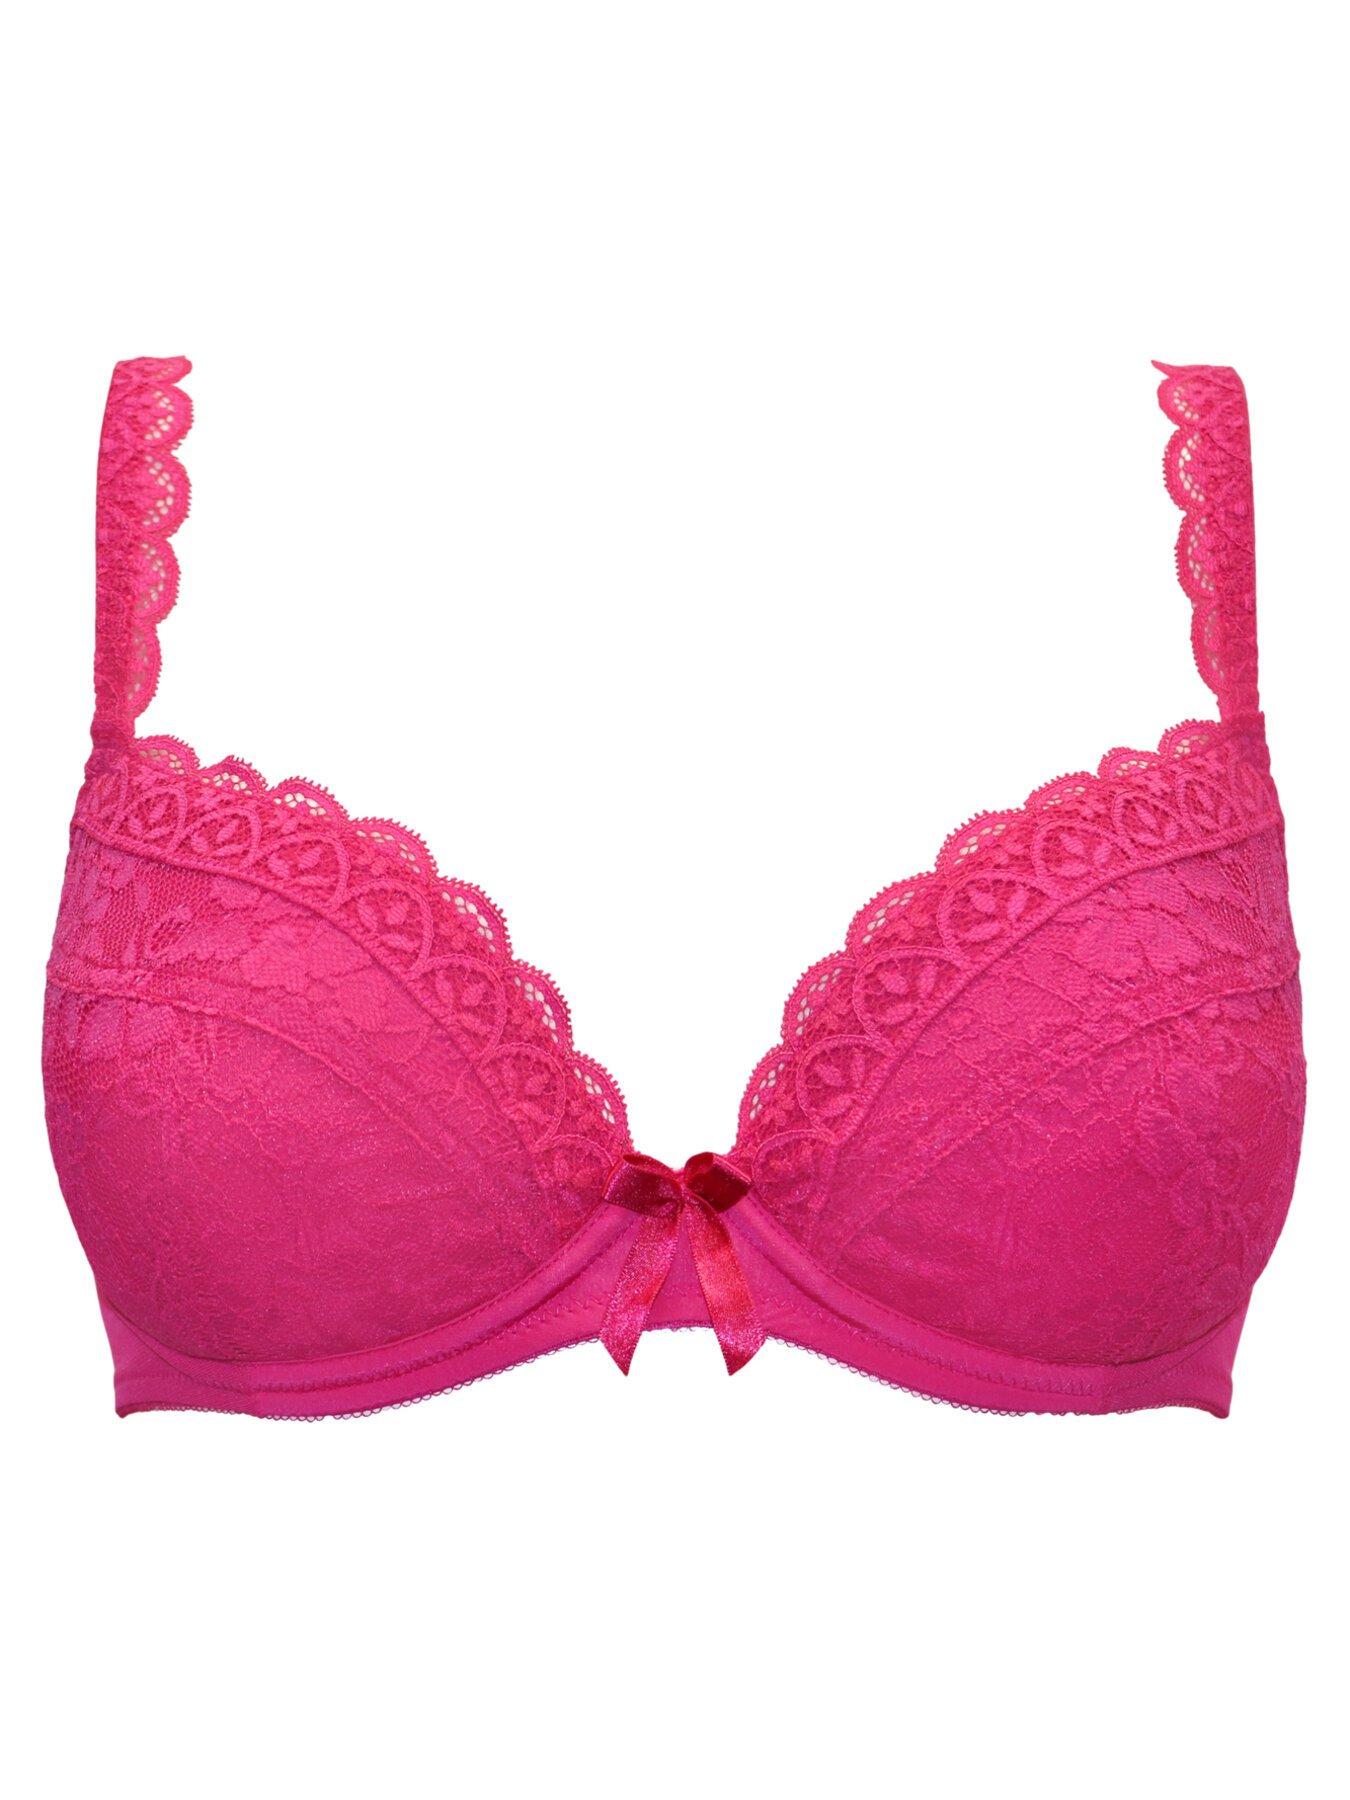 Pour Moi Rebel Padded Plunge Bra - Bright Pink